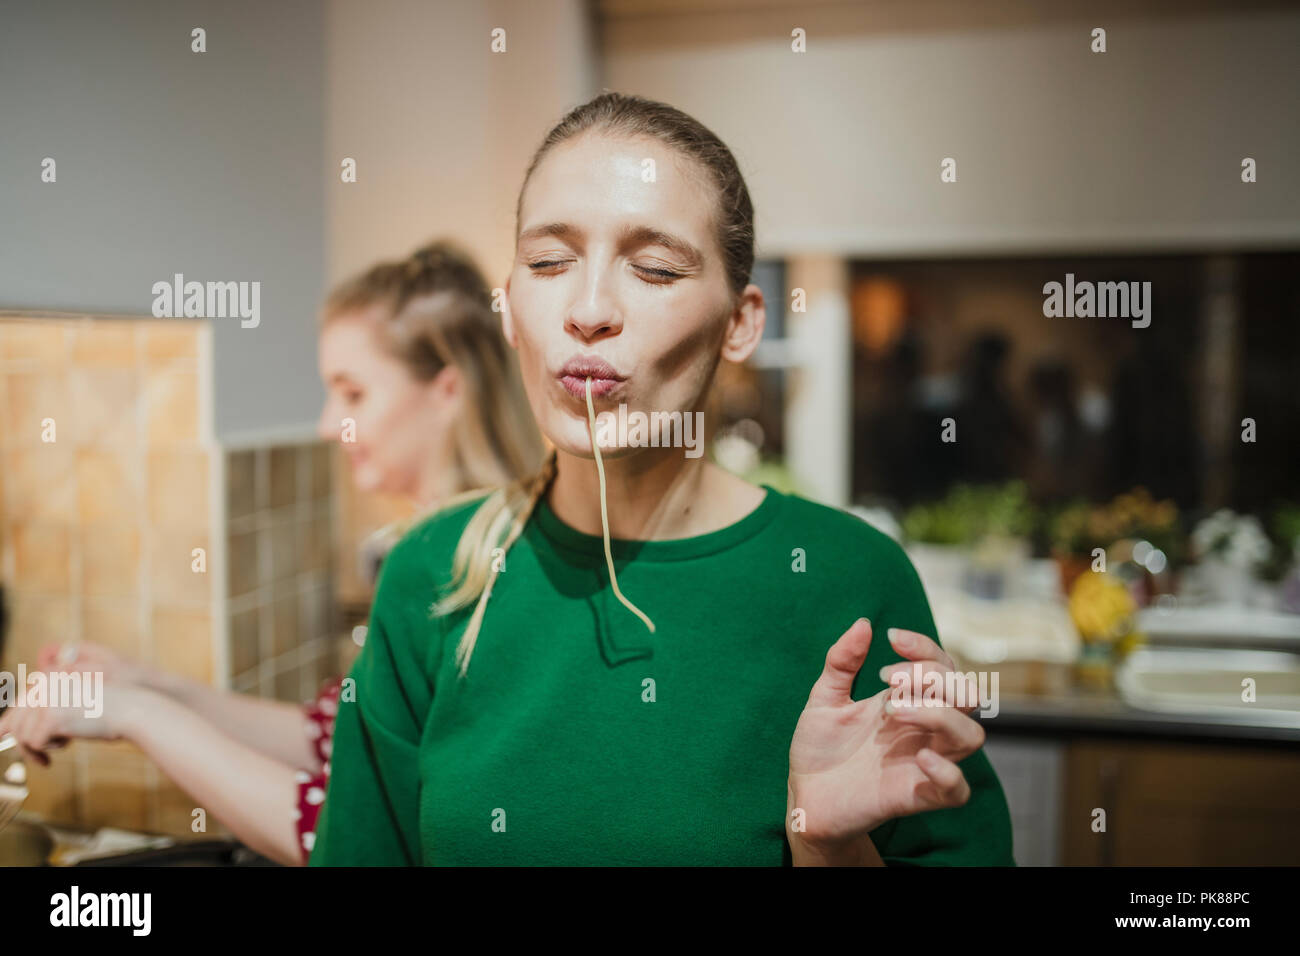 Young woman is posing for the camera with spaghetti hanging out her mouth. Stock Photo